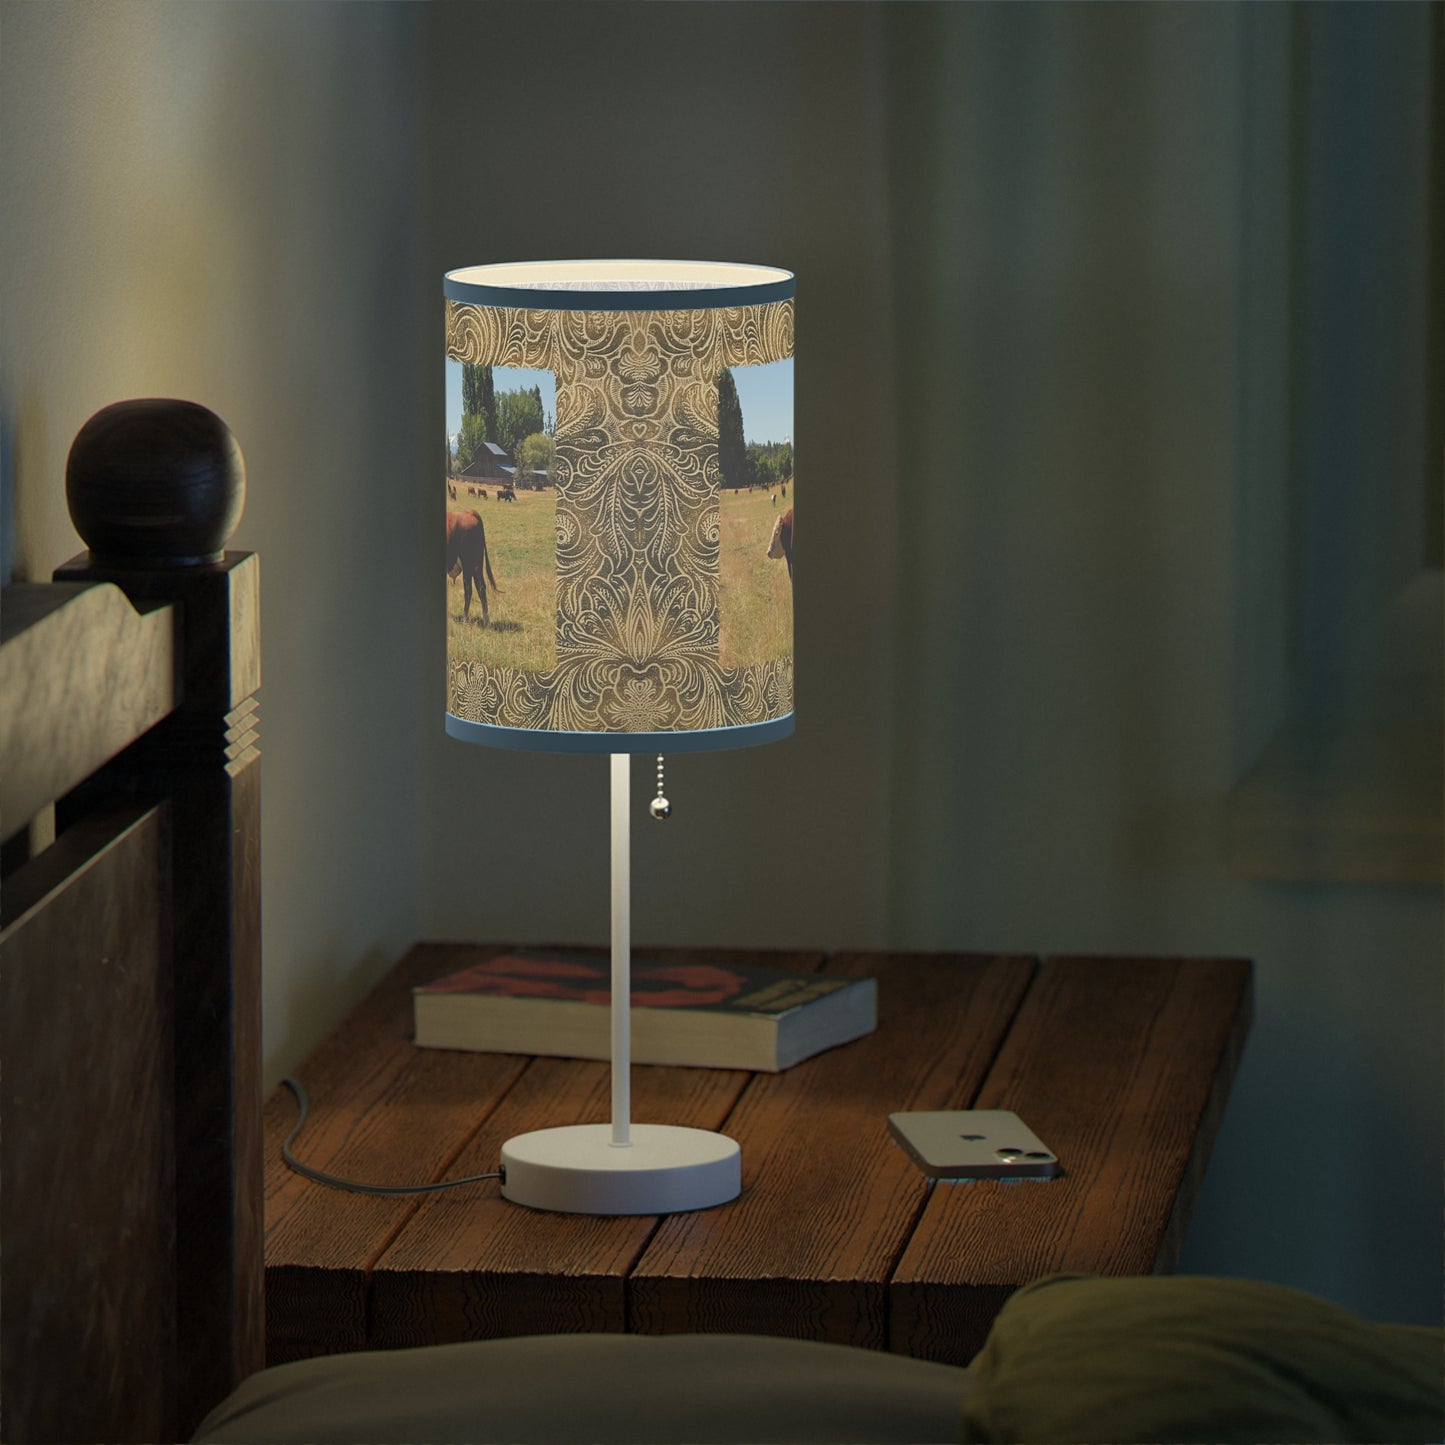 King Of The Pasture Lamp on a Stand